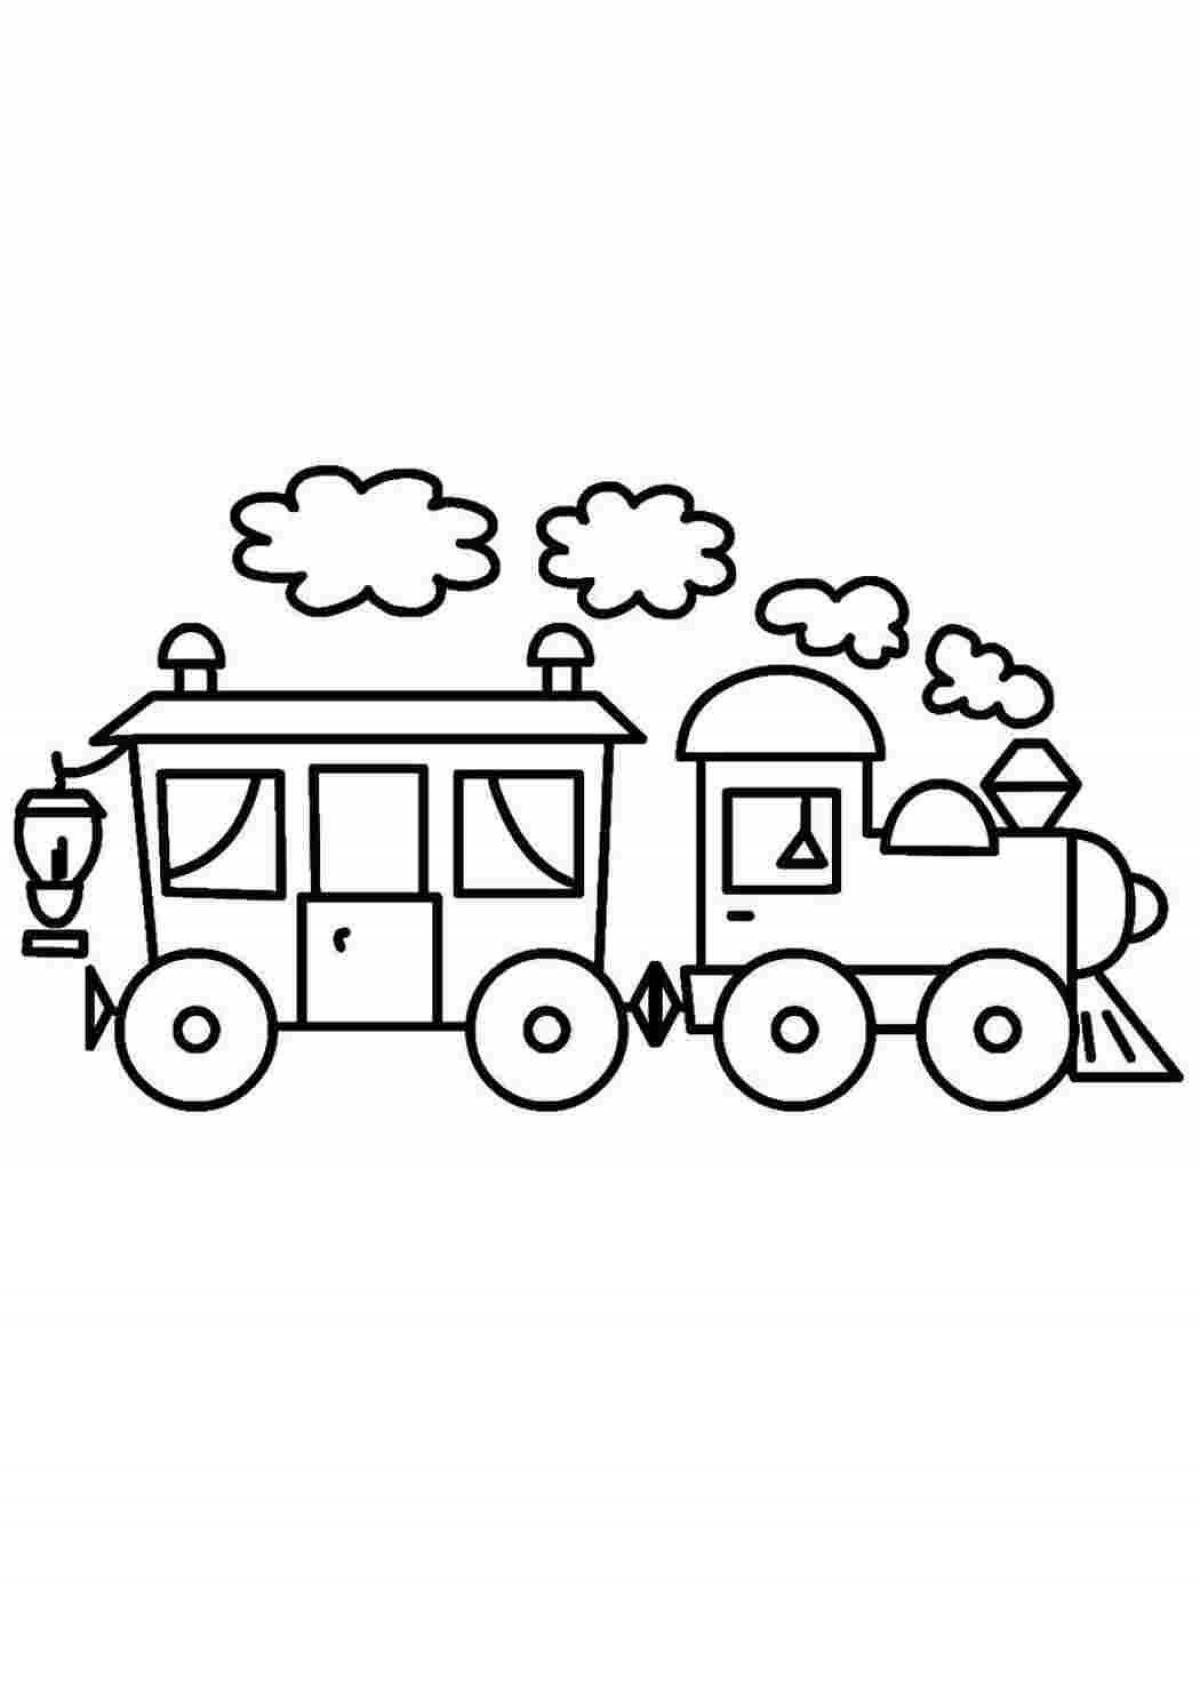 Fun train coloring book for 2-3 year olds